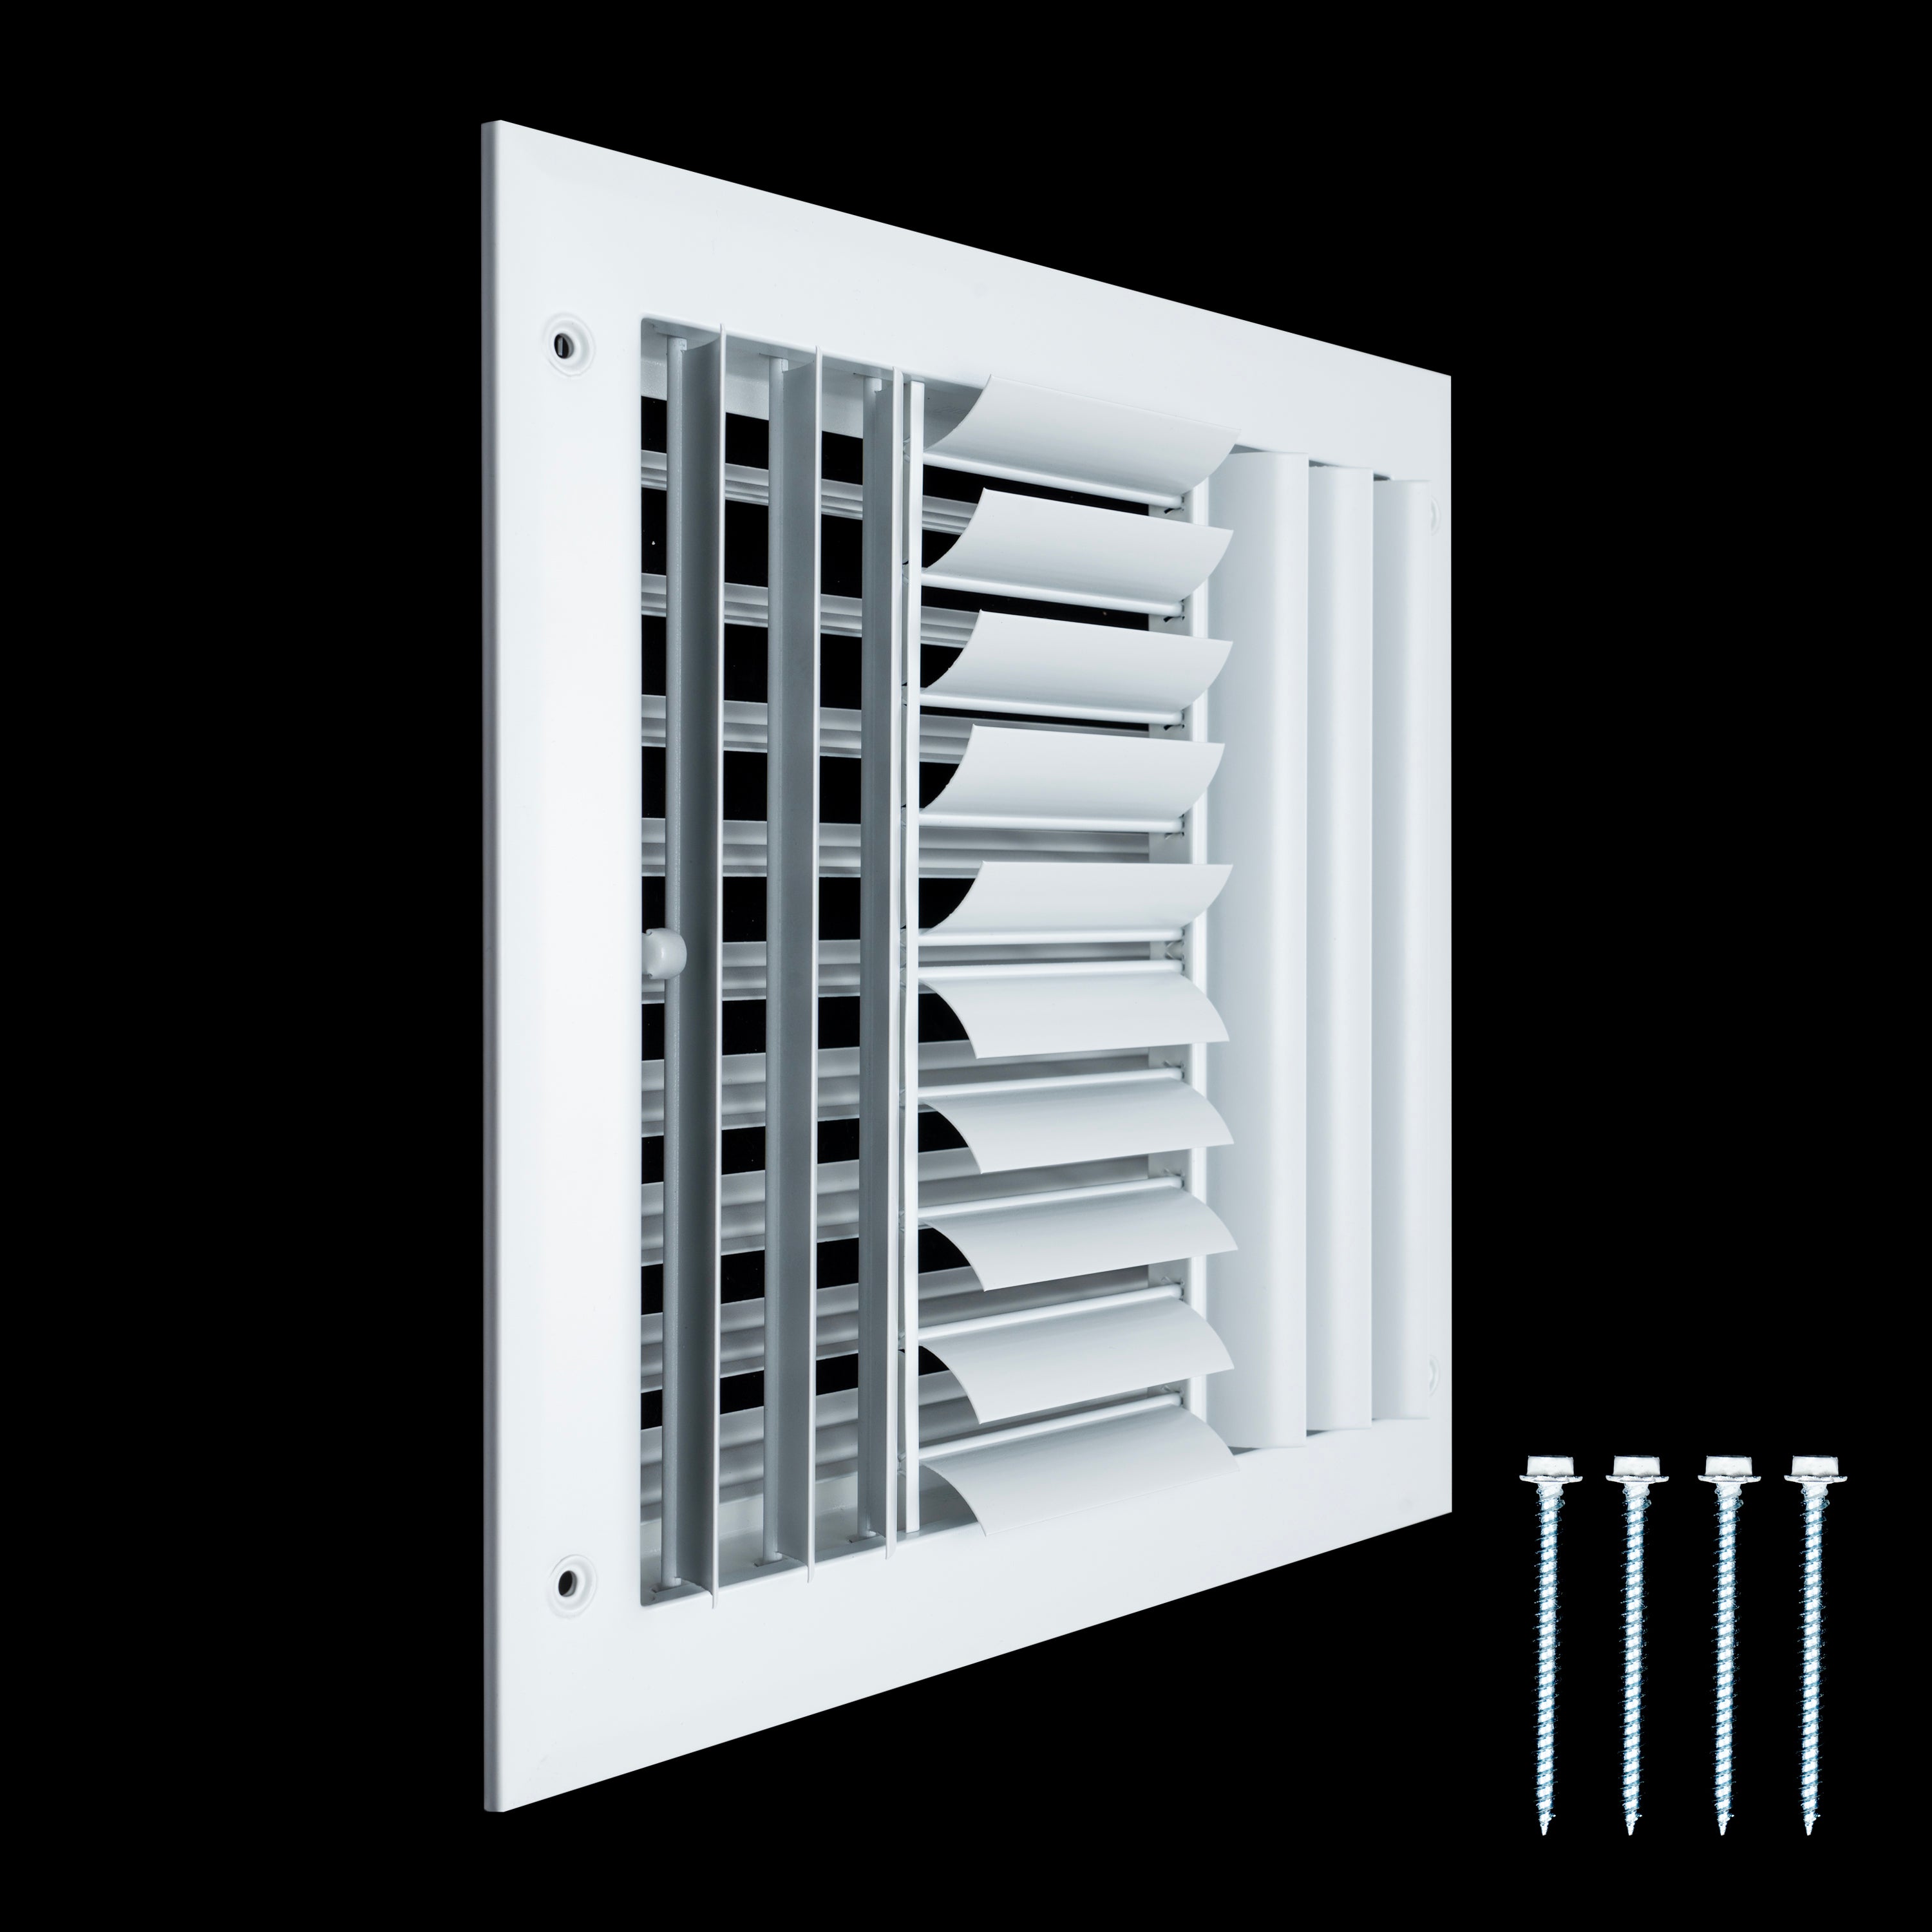 10"W x 10"H [Duct Opening] Aluminum 4-WAY Adjustable Air Supply Grille | Register Vent Cover Grill for Sidewall and Ceiling | White | Outer Dimensions: 11.75"W x 11.75"